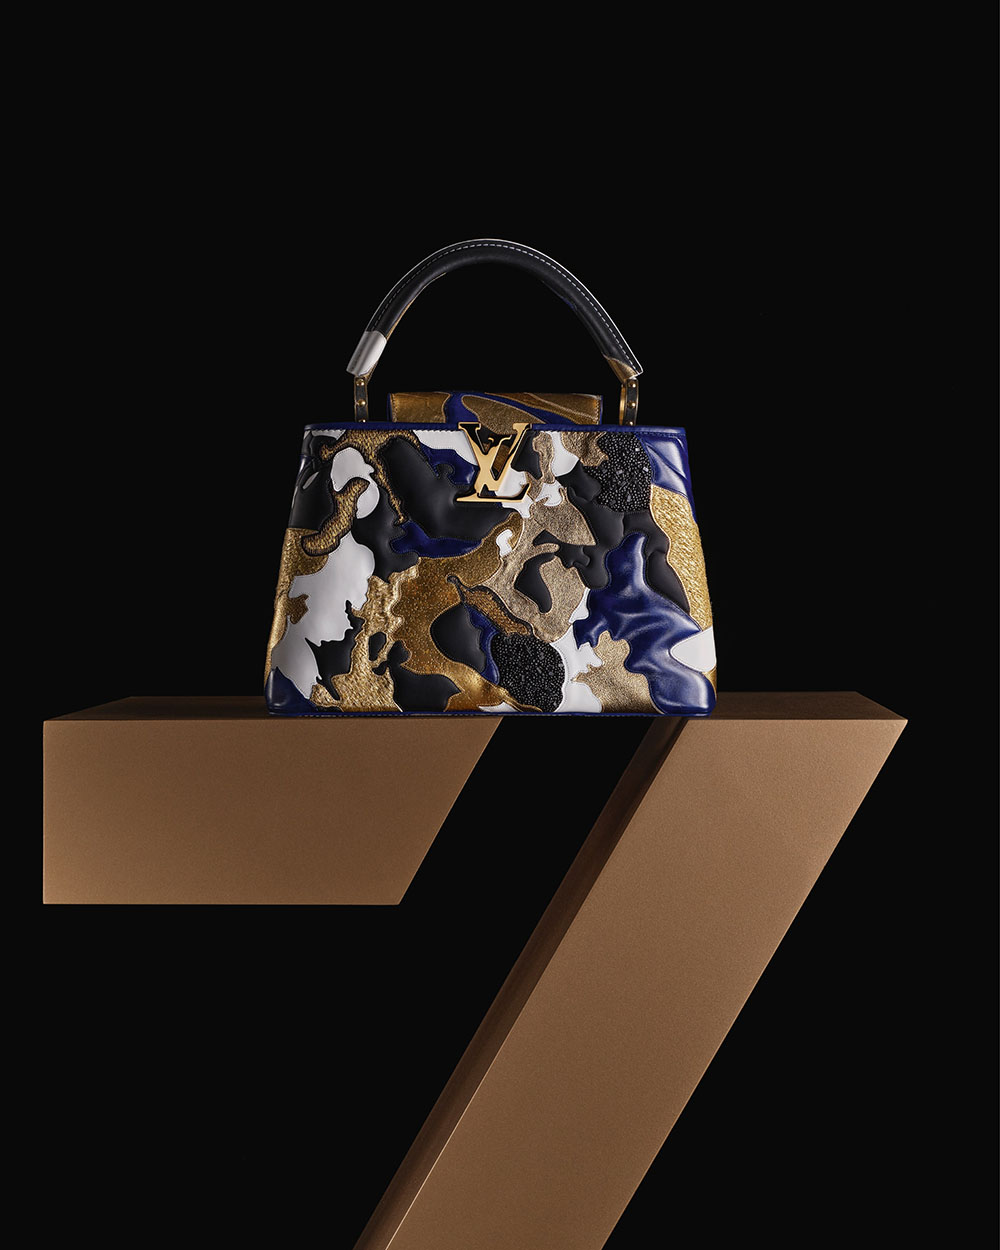 Louis Vuitton unveils its second Artycapucines collection, the most artistic collection of the season